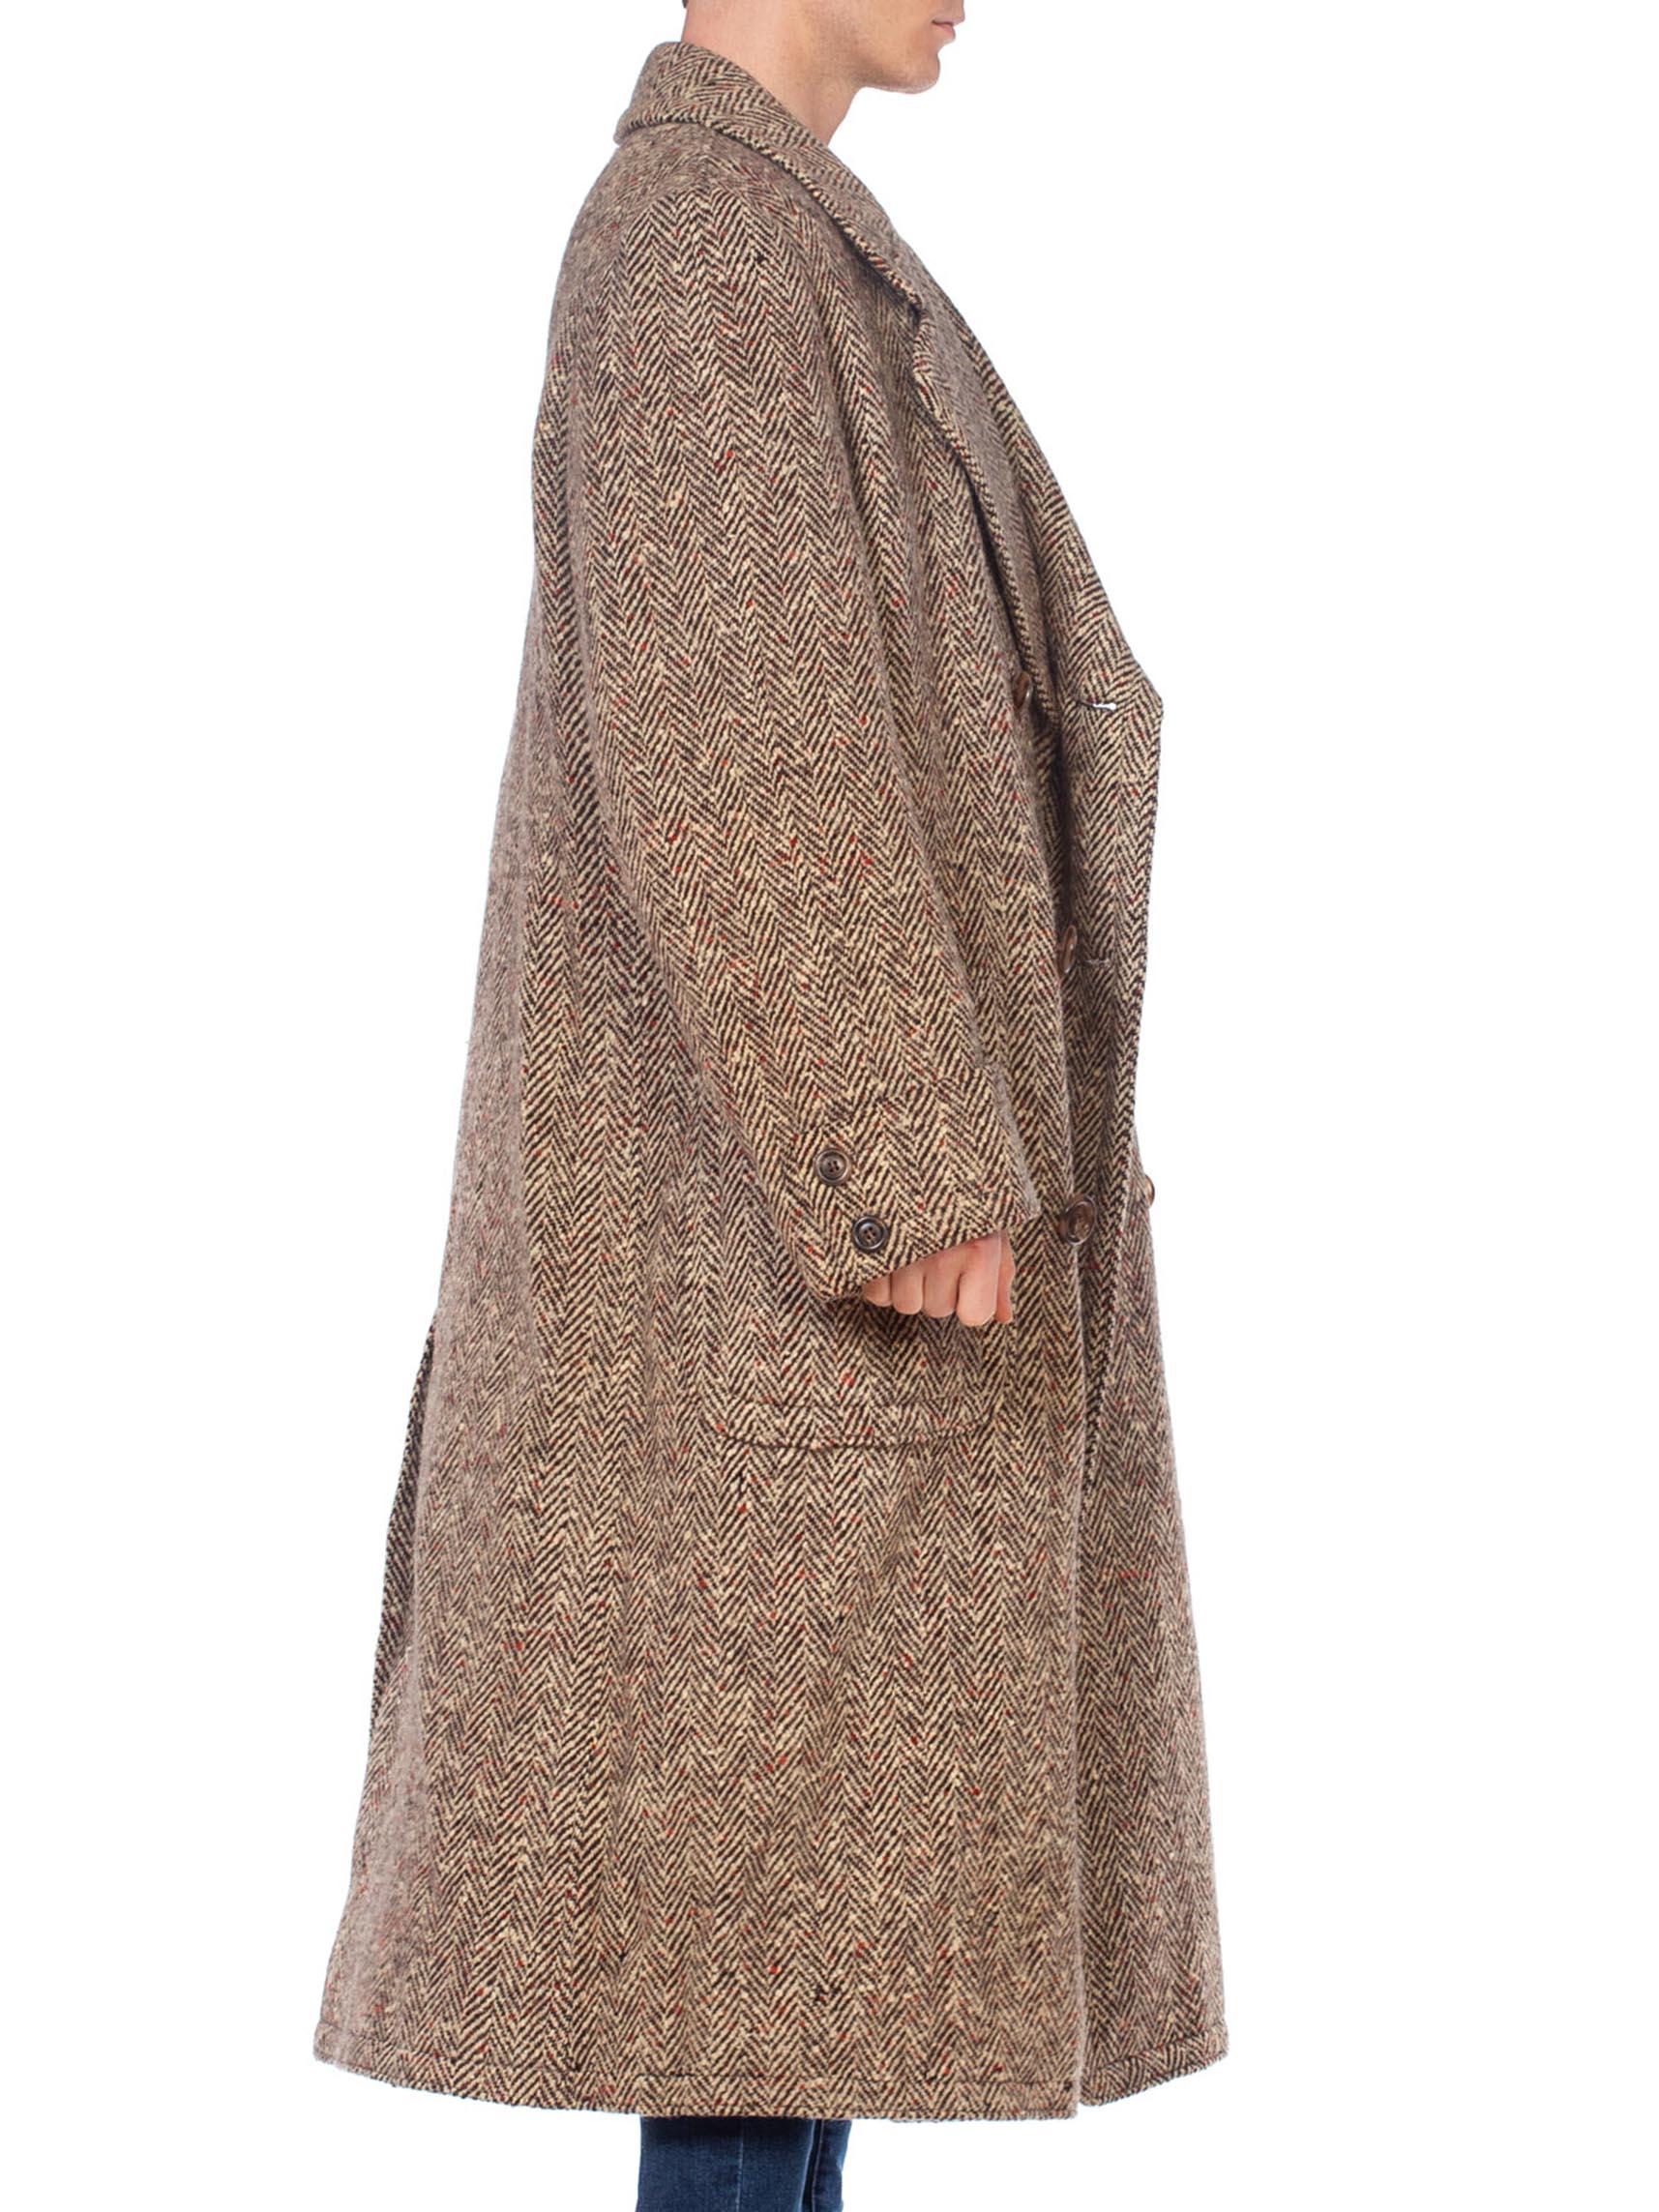 Brown Mens Hand Woven Harris Tweed Overcoat, 1920's Style From 1960's